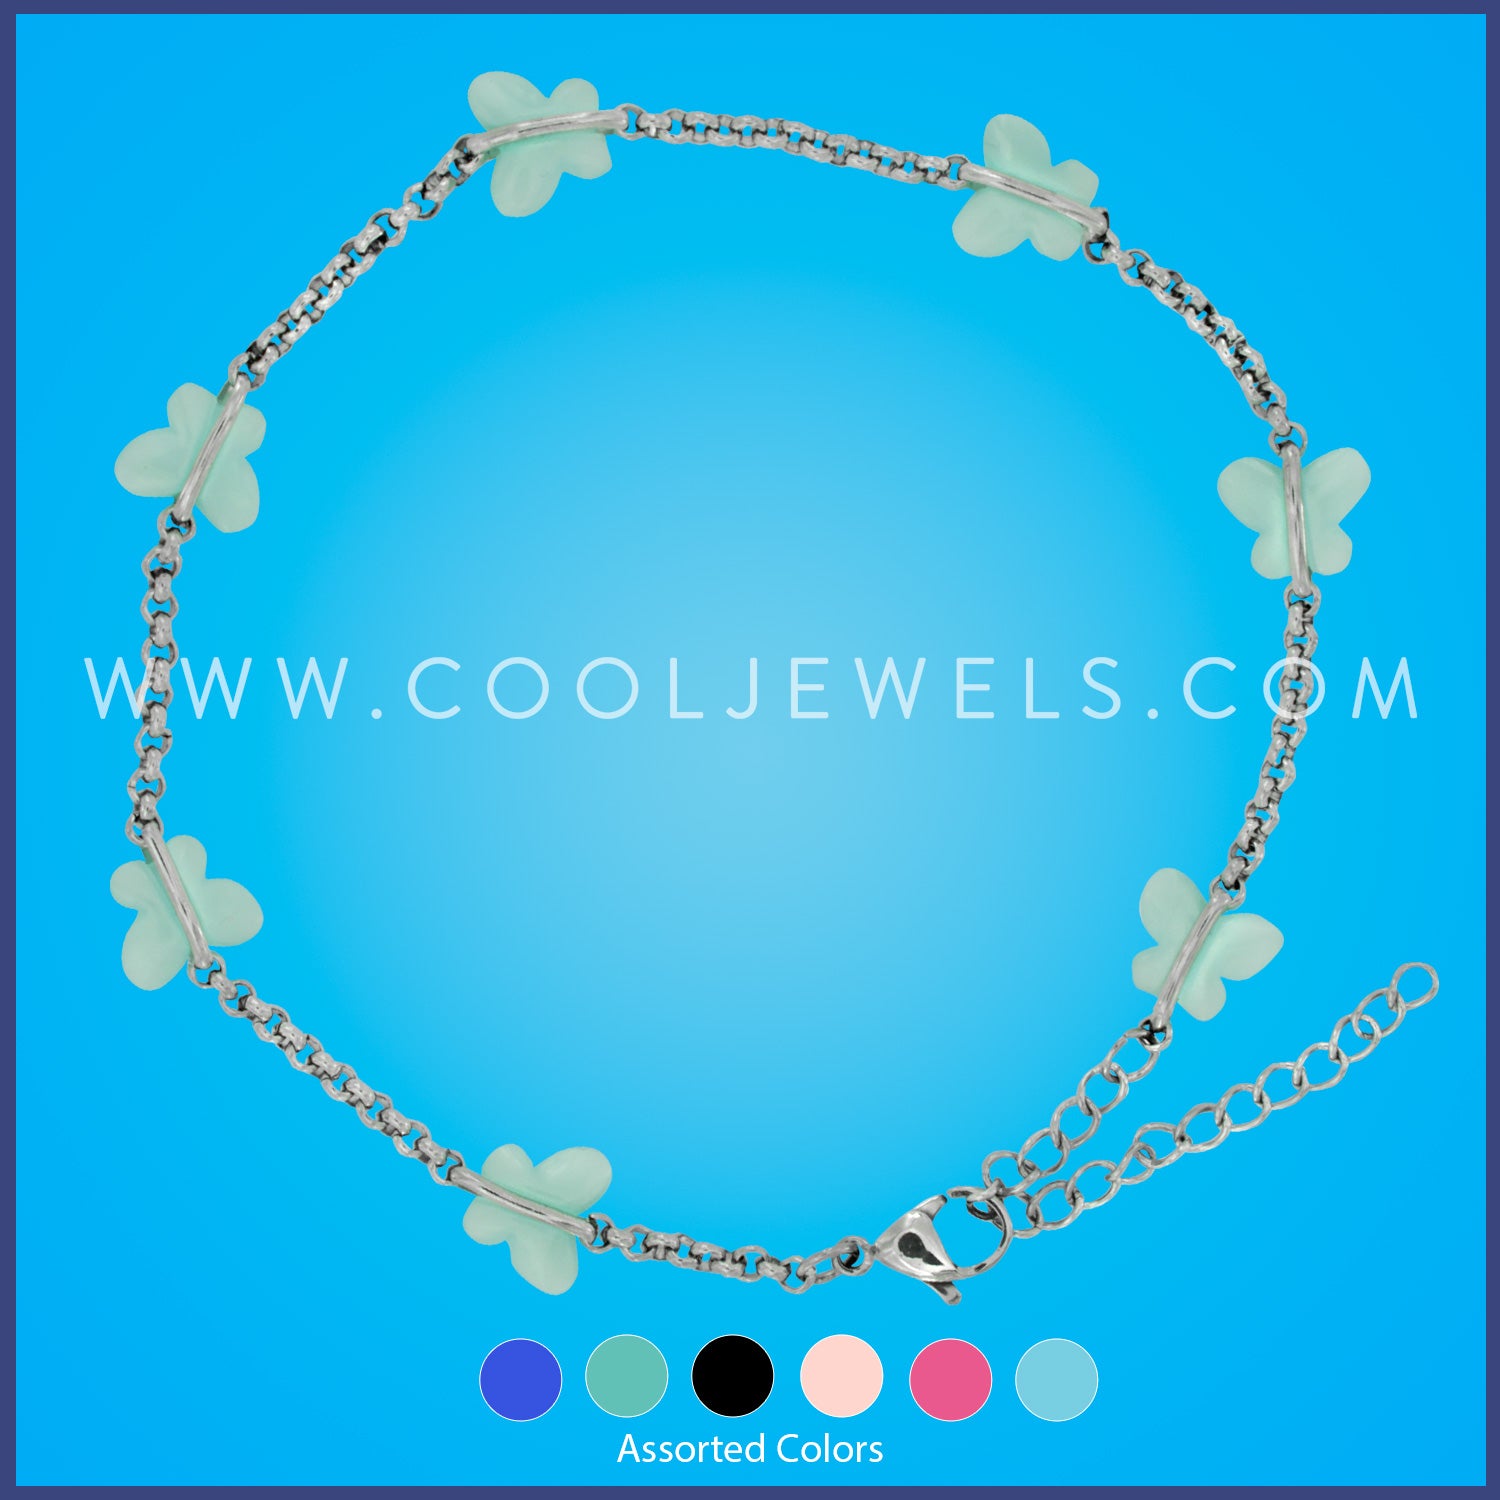 STAINLESS STEEL CHAIN ANKLET WITH BUTTERFLIES - ASSORTED